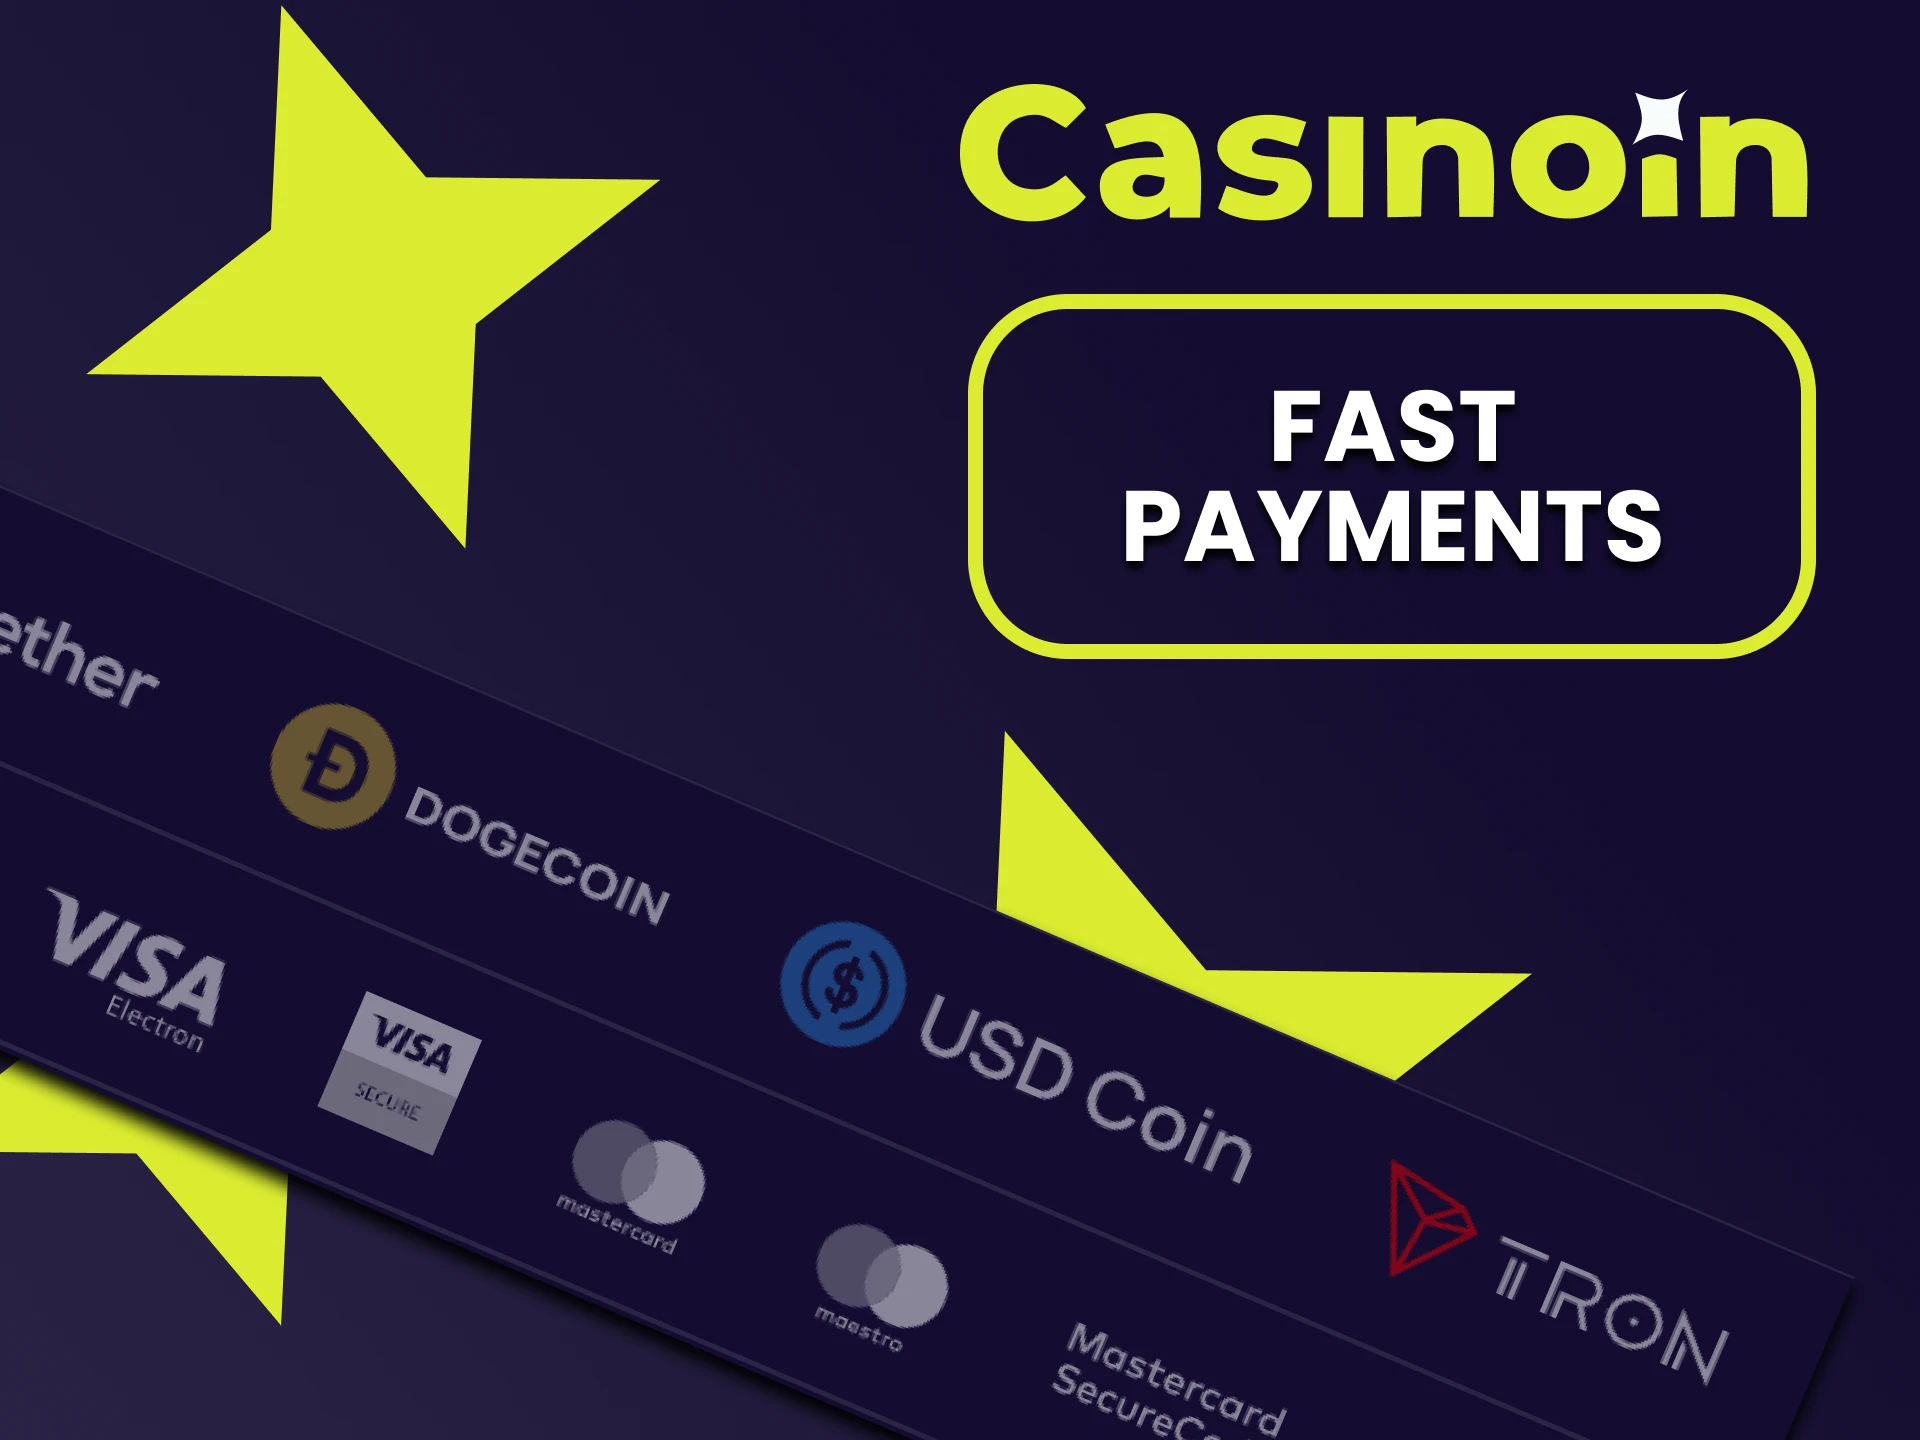 Casinoin has a fast way to transact funds.